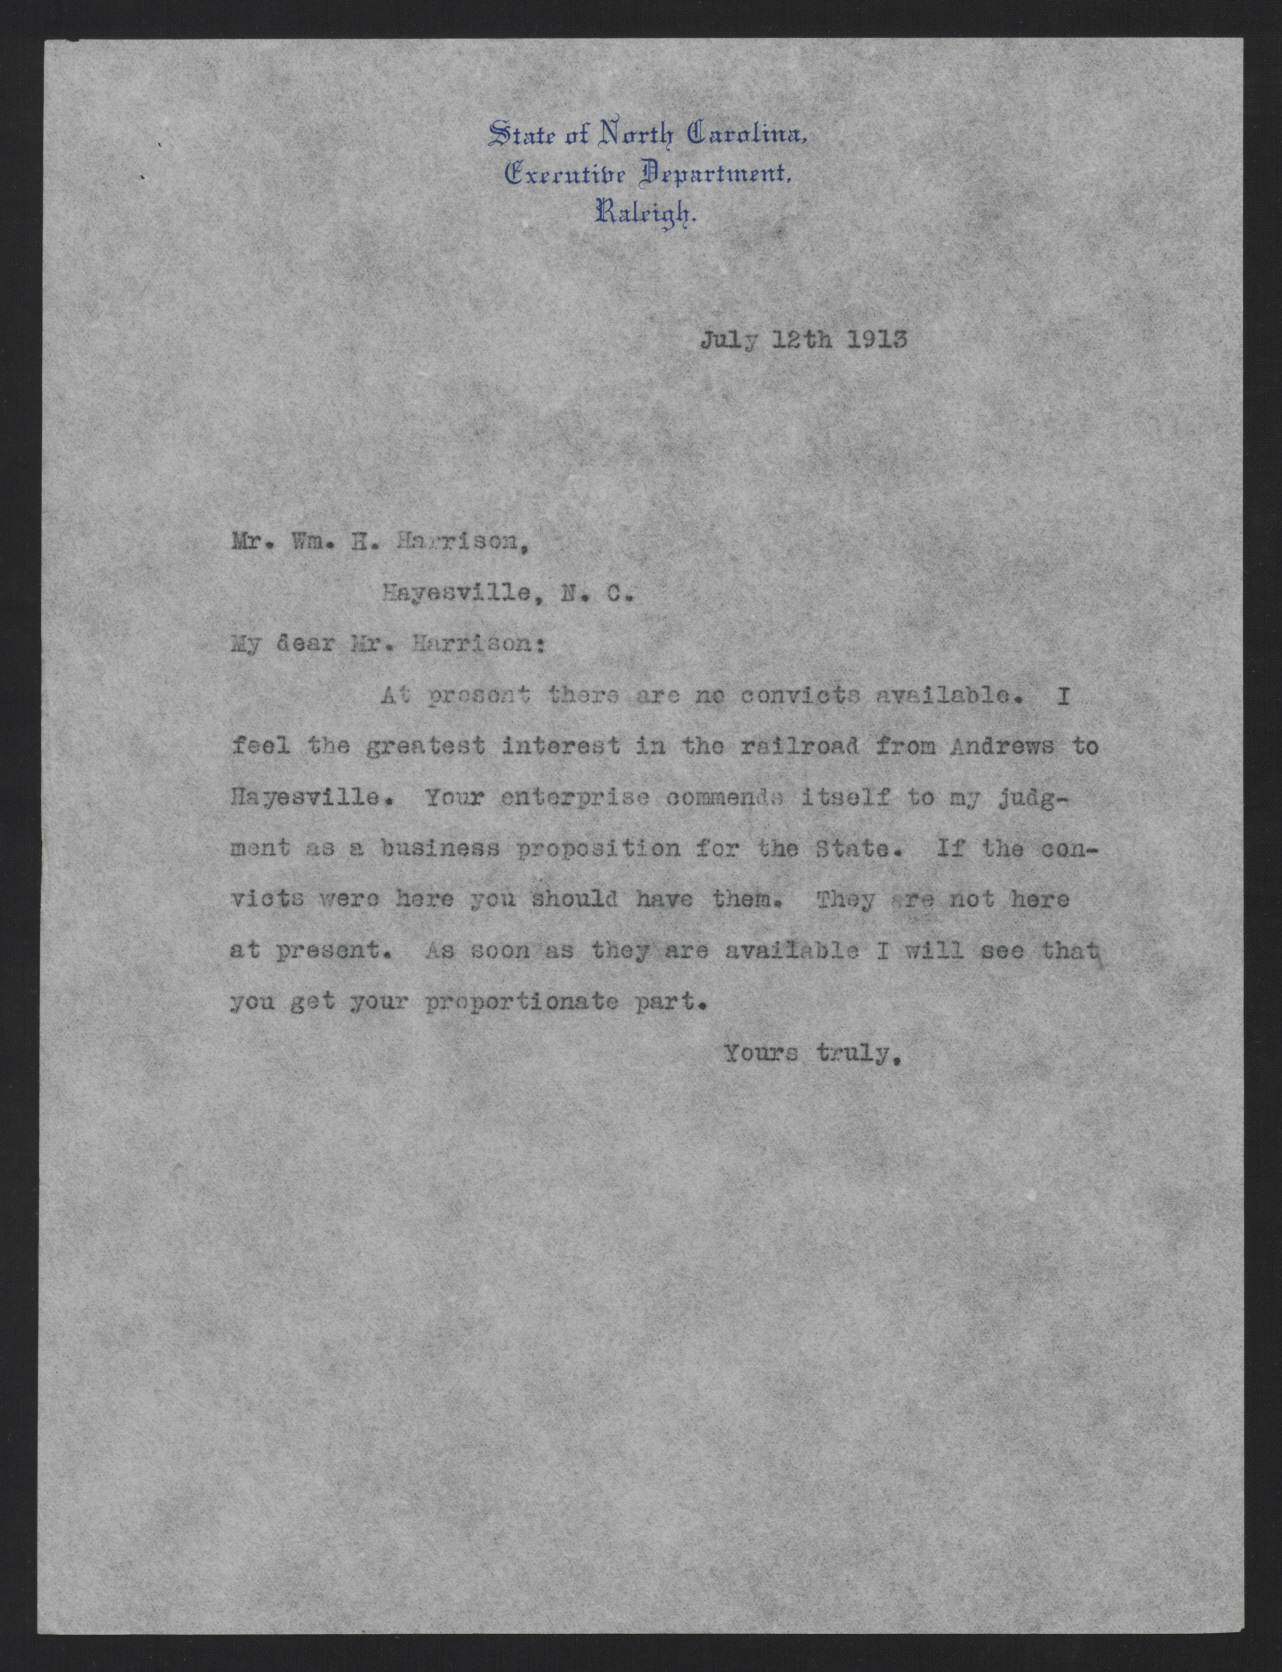 Letter from Craig to Harrison, July 12, 1913